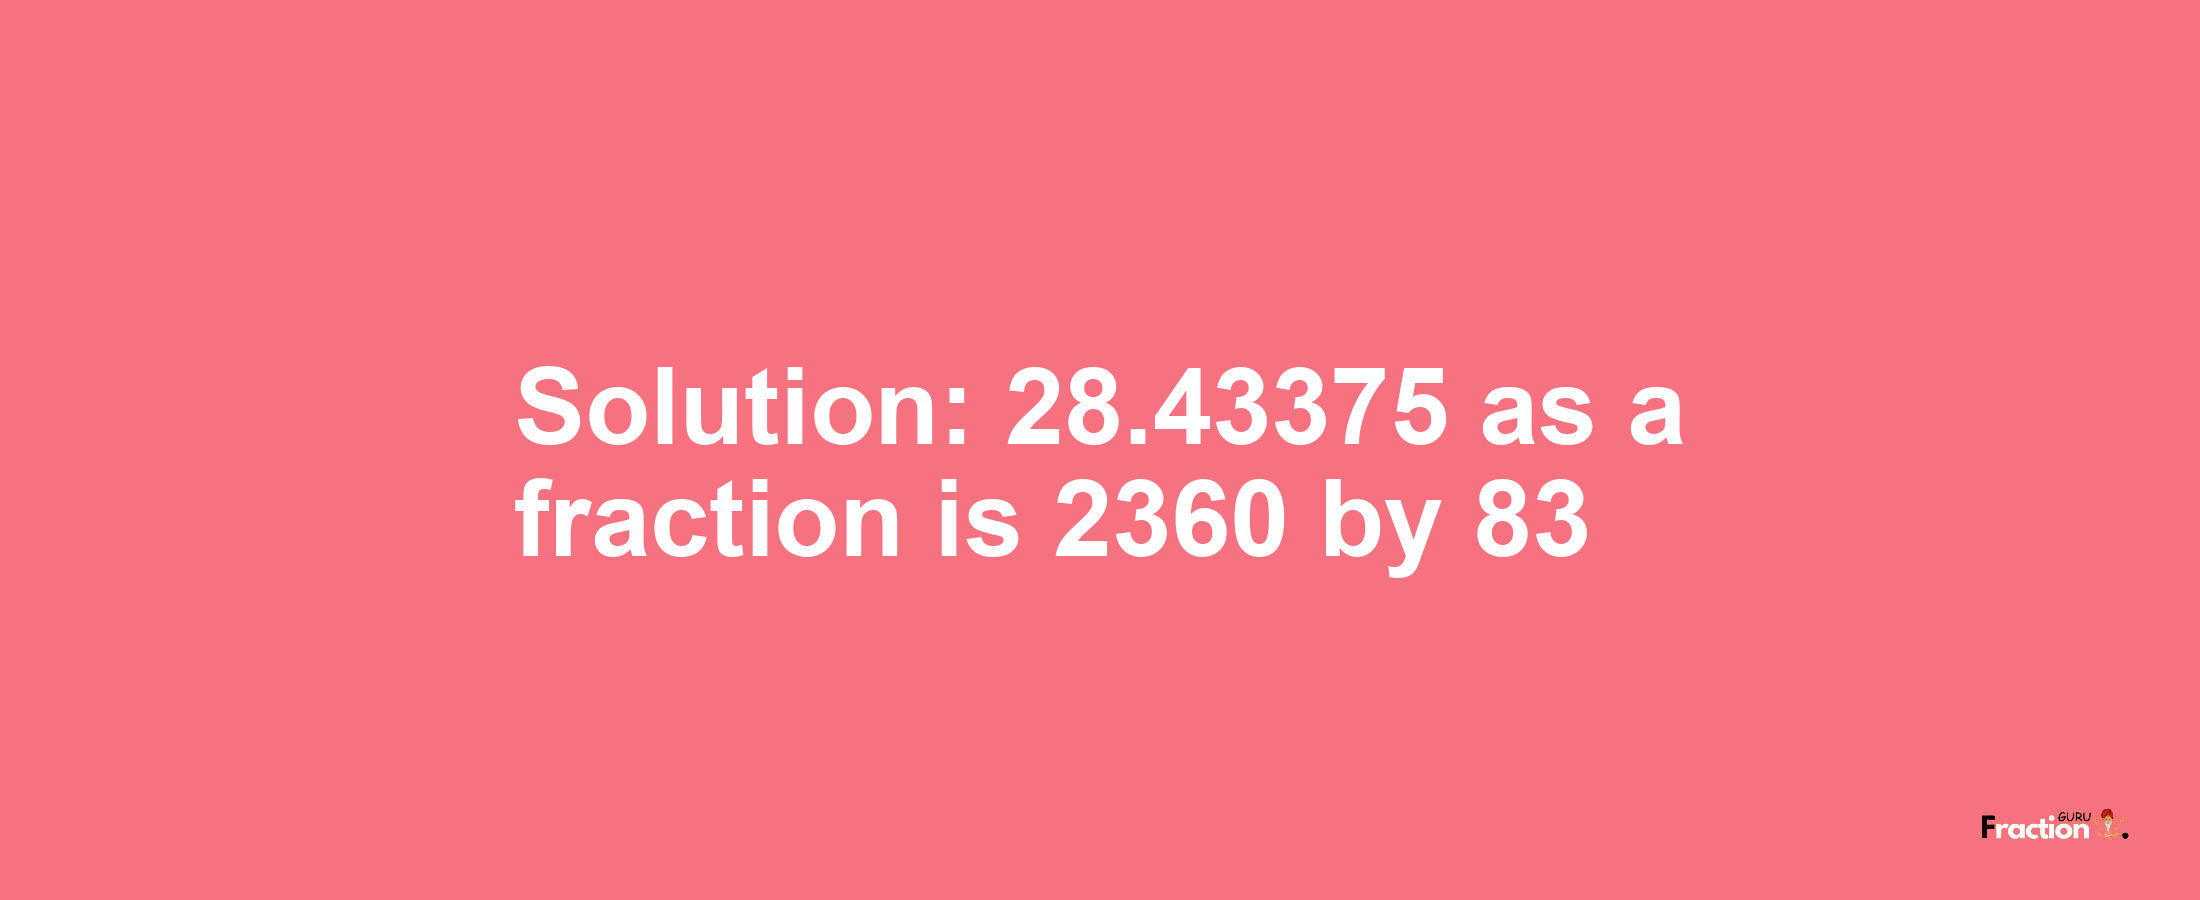 Solution:28.43375 as a fraction is 2360/83